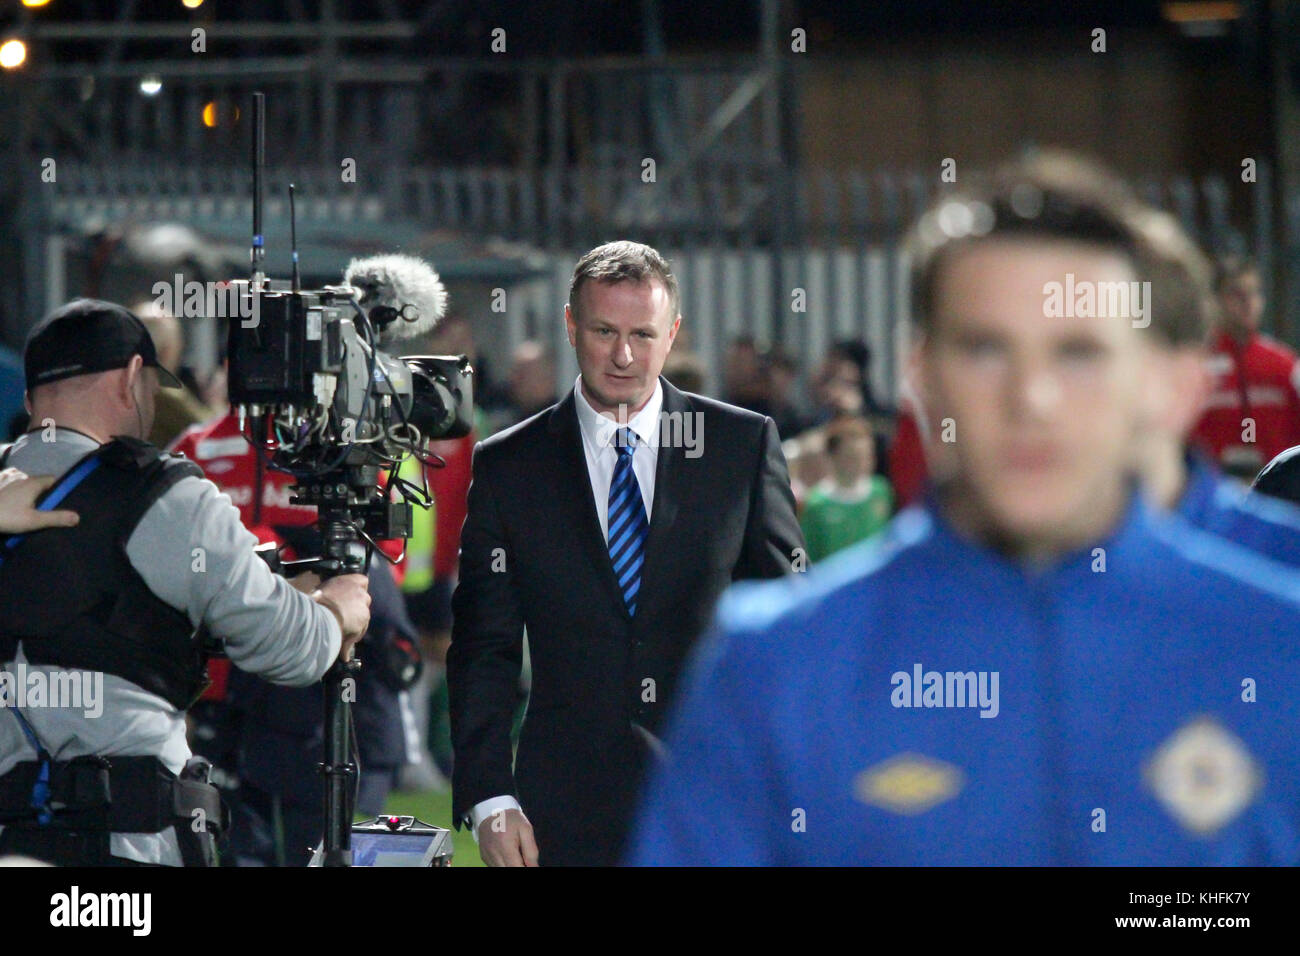 Michael O'Neill's first game in charge of Northern Ireland. O'Neill succeeded Nigel Worthington and his first game was at home to Norway on 29 February 2012 at Windsor Park Belfast. O'Neill makes his way to the dugout. Stock Photo